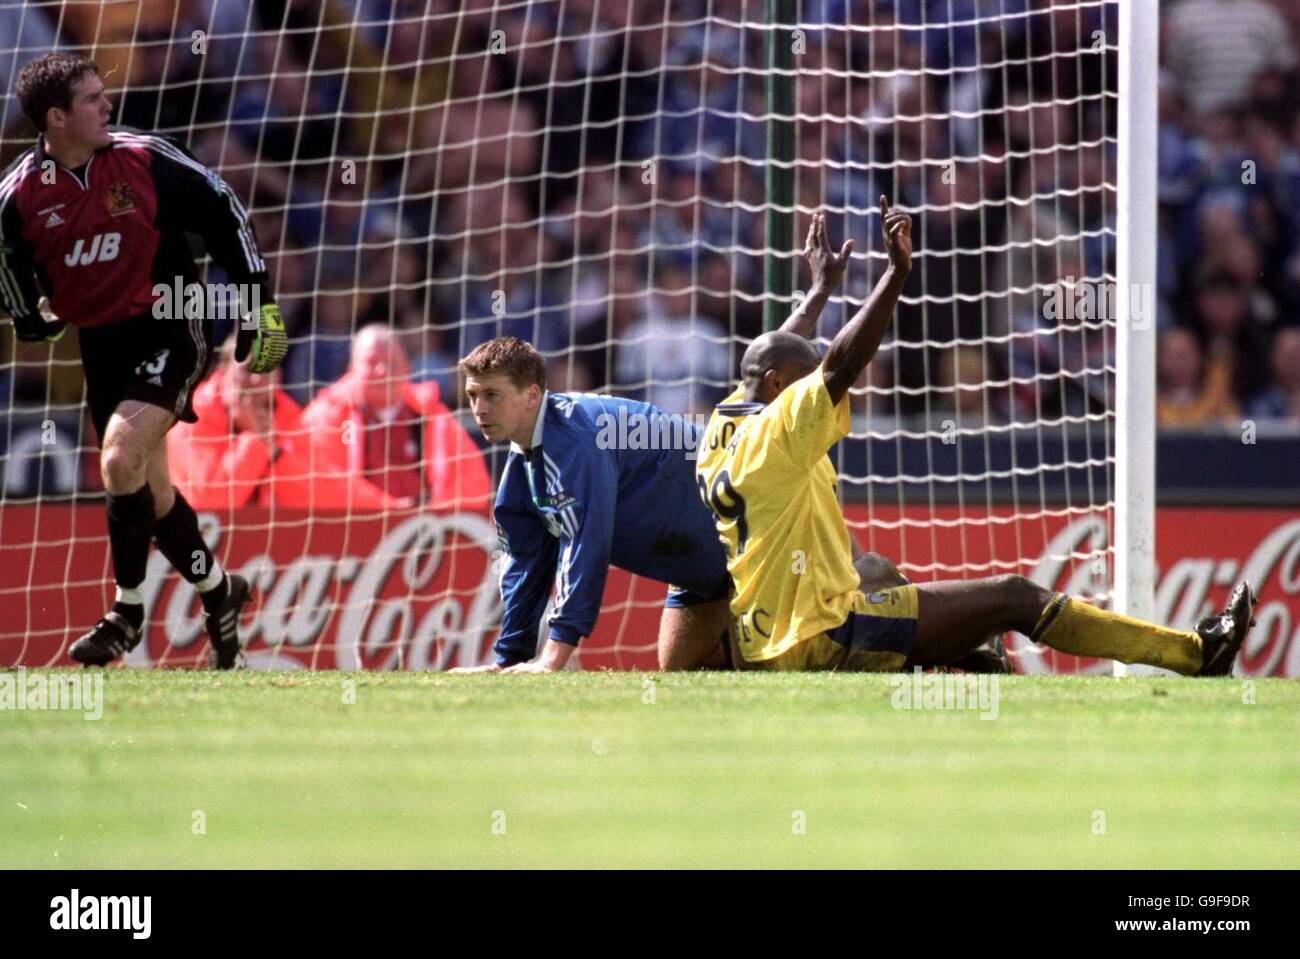 Gillingham's Iffy Onuora (r) claims the ball had crossed the line as Wigan Athletic's Pat McGibbon (c) and goalkeeper Derek Stillie (l) await the referee's decision Stock Photo